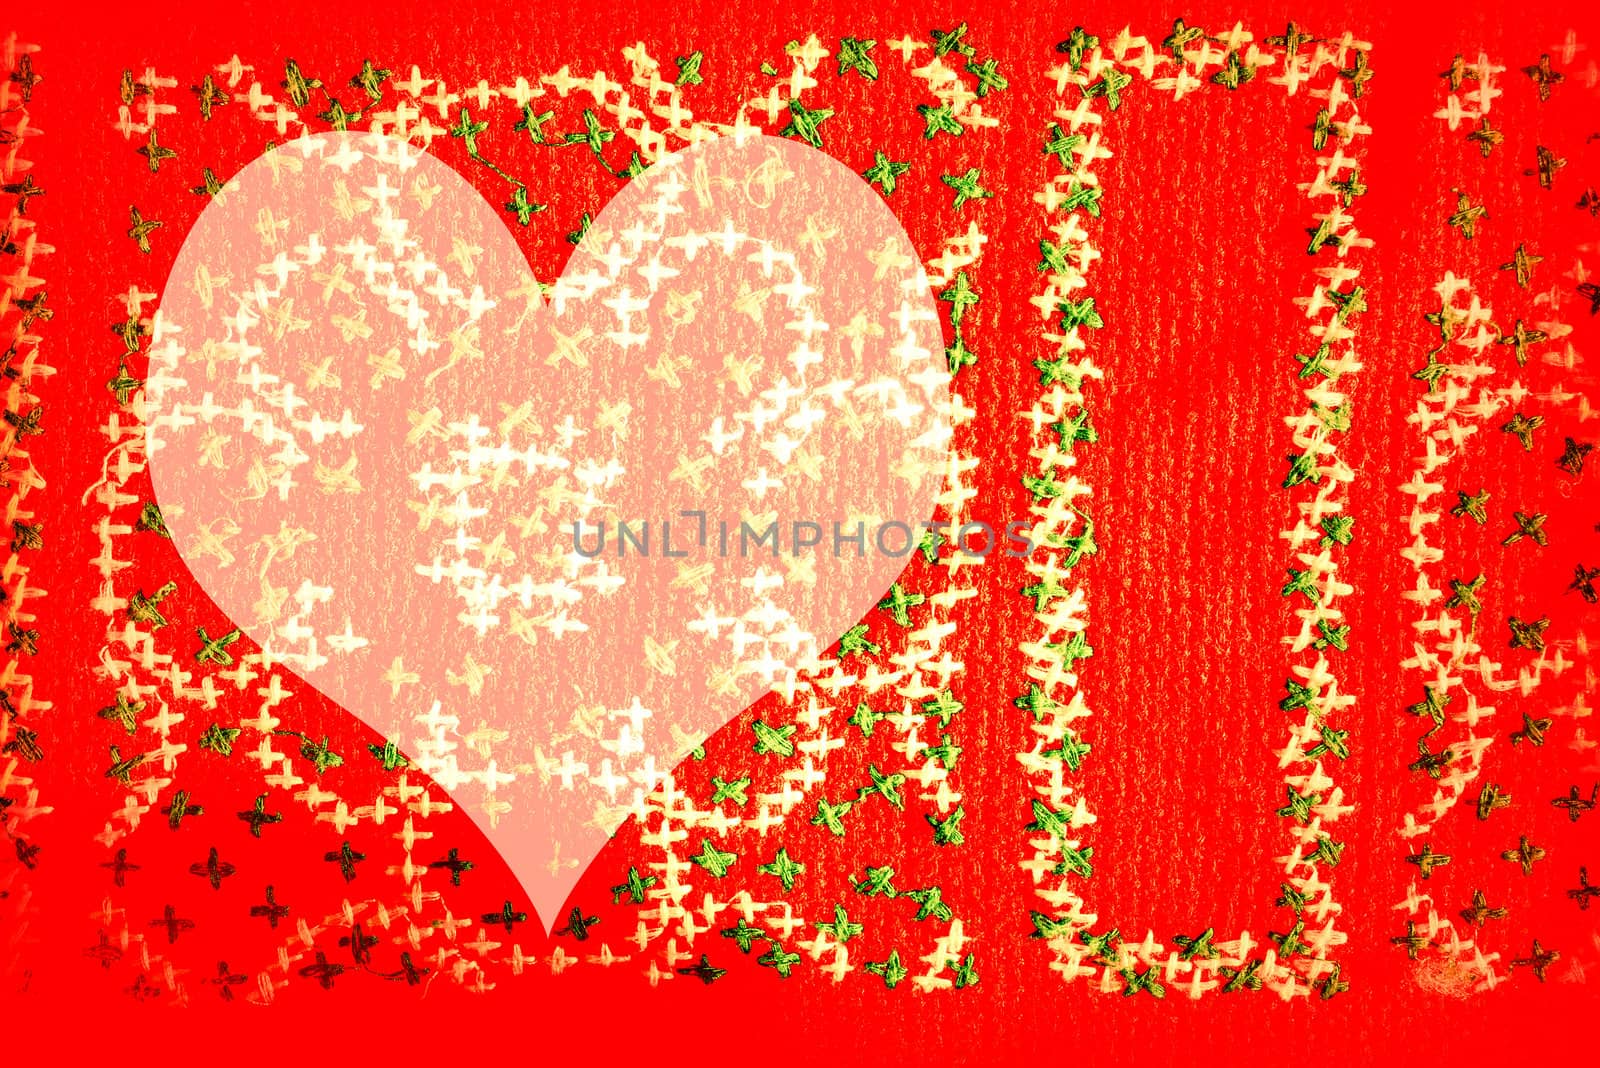 colorful background red heart with cross stitching